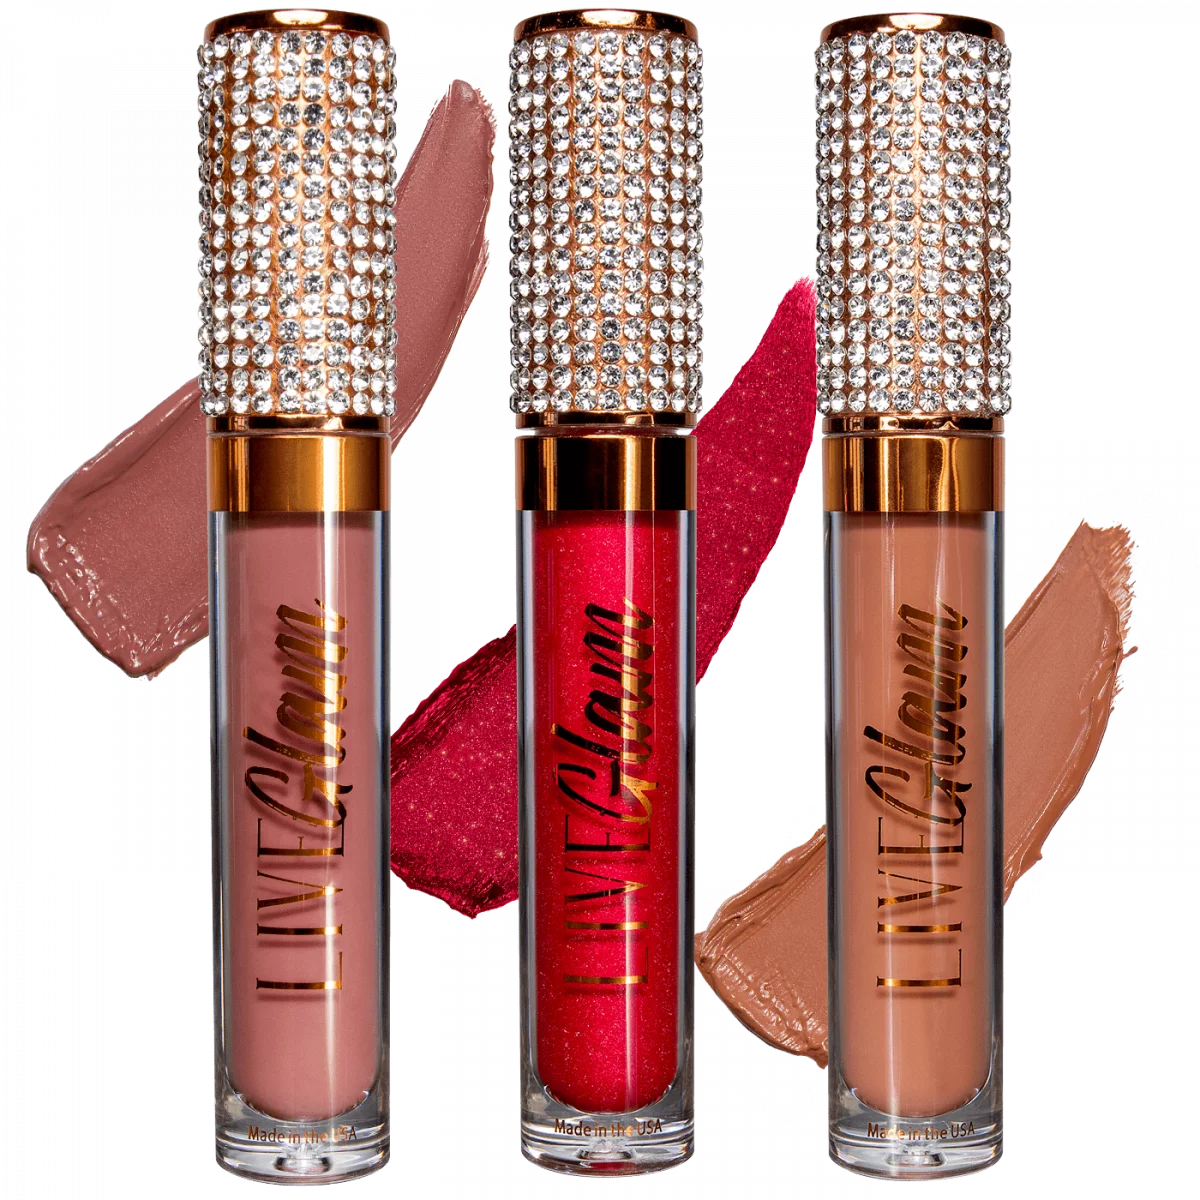 LiveGlam Bling in the holidays lippie collection 2020